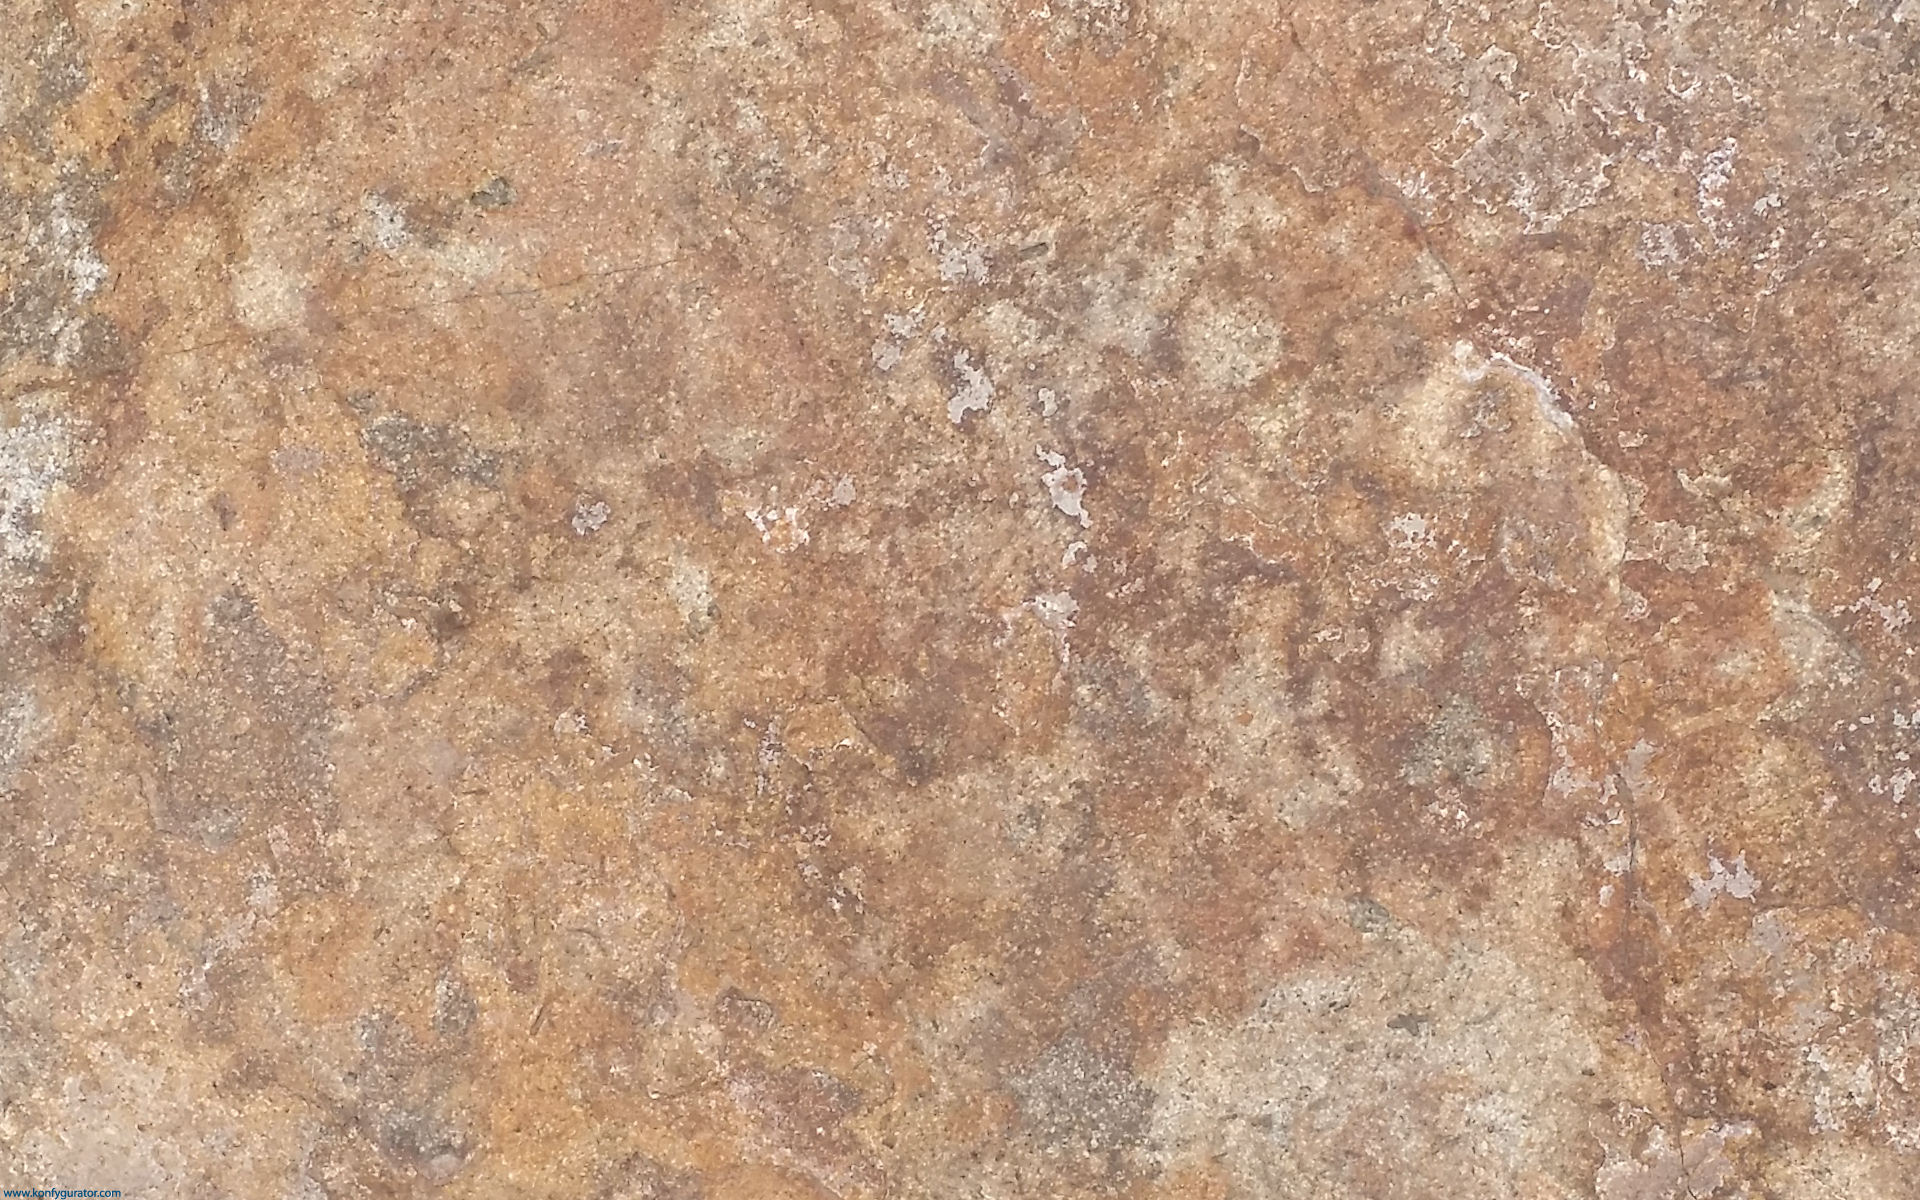 HD Wallpapers - Textures - ocher, red, stone